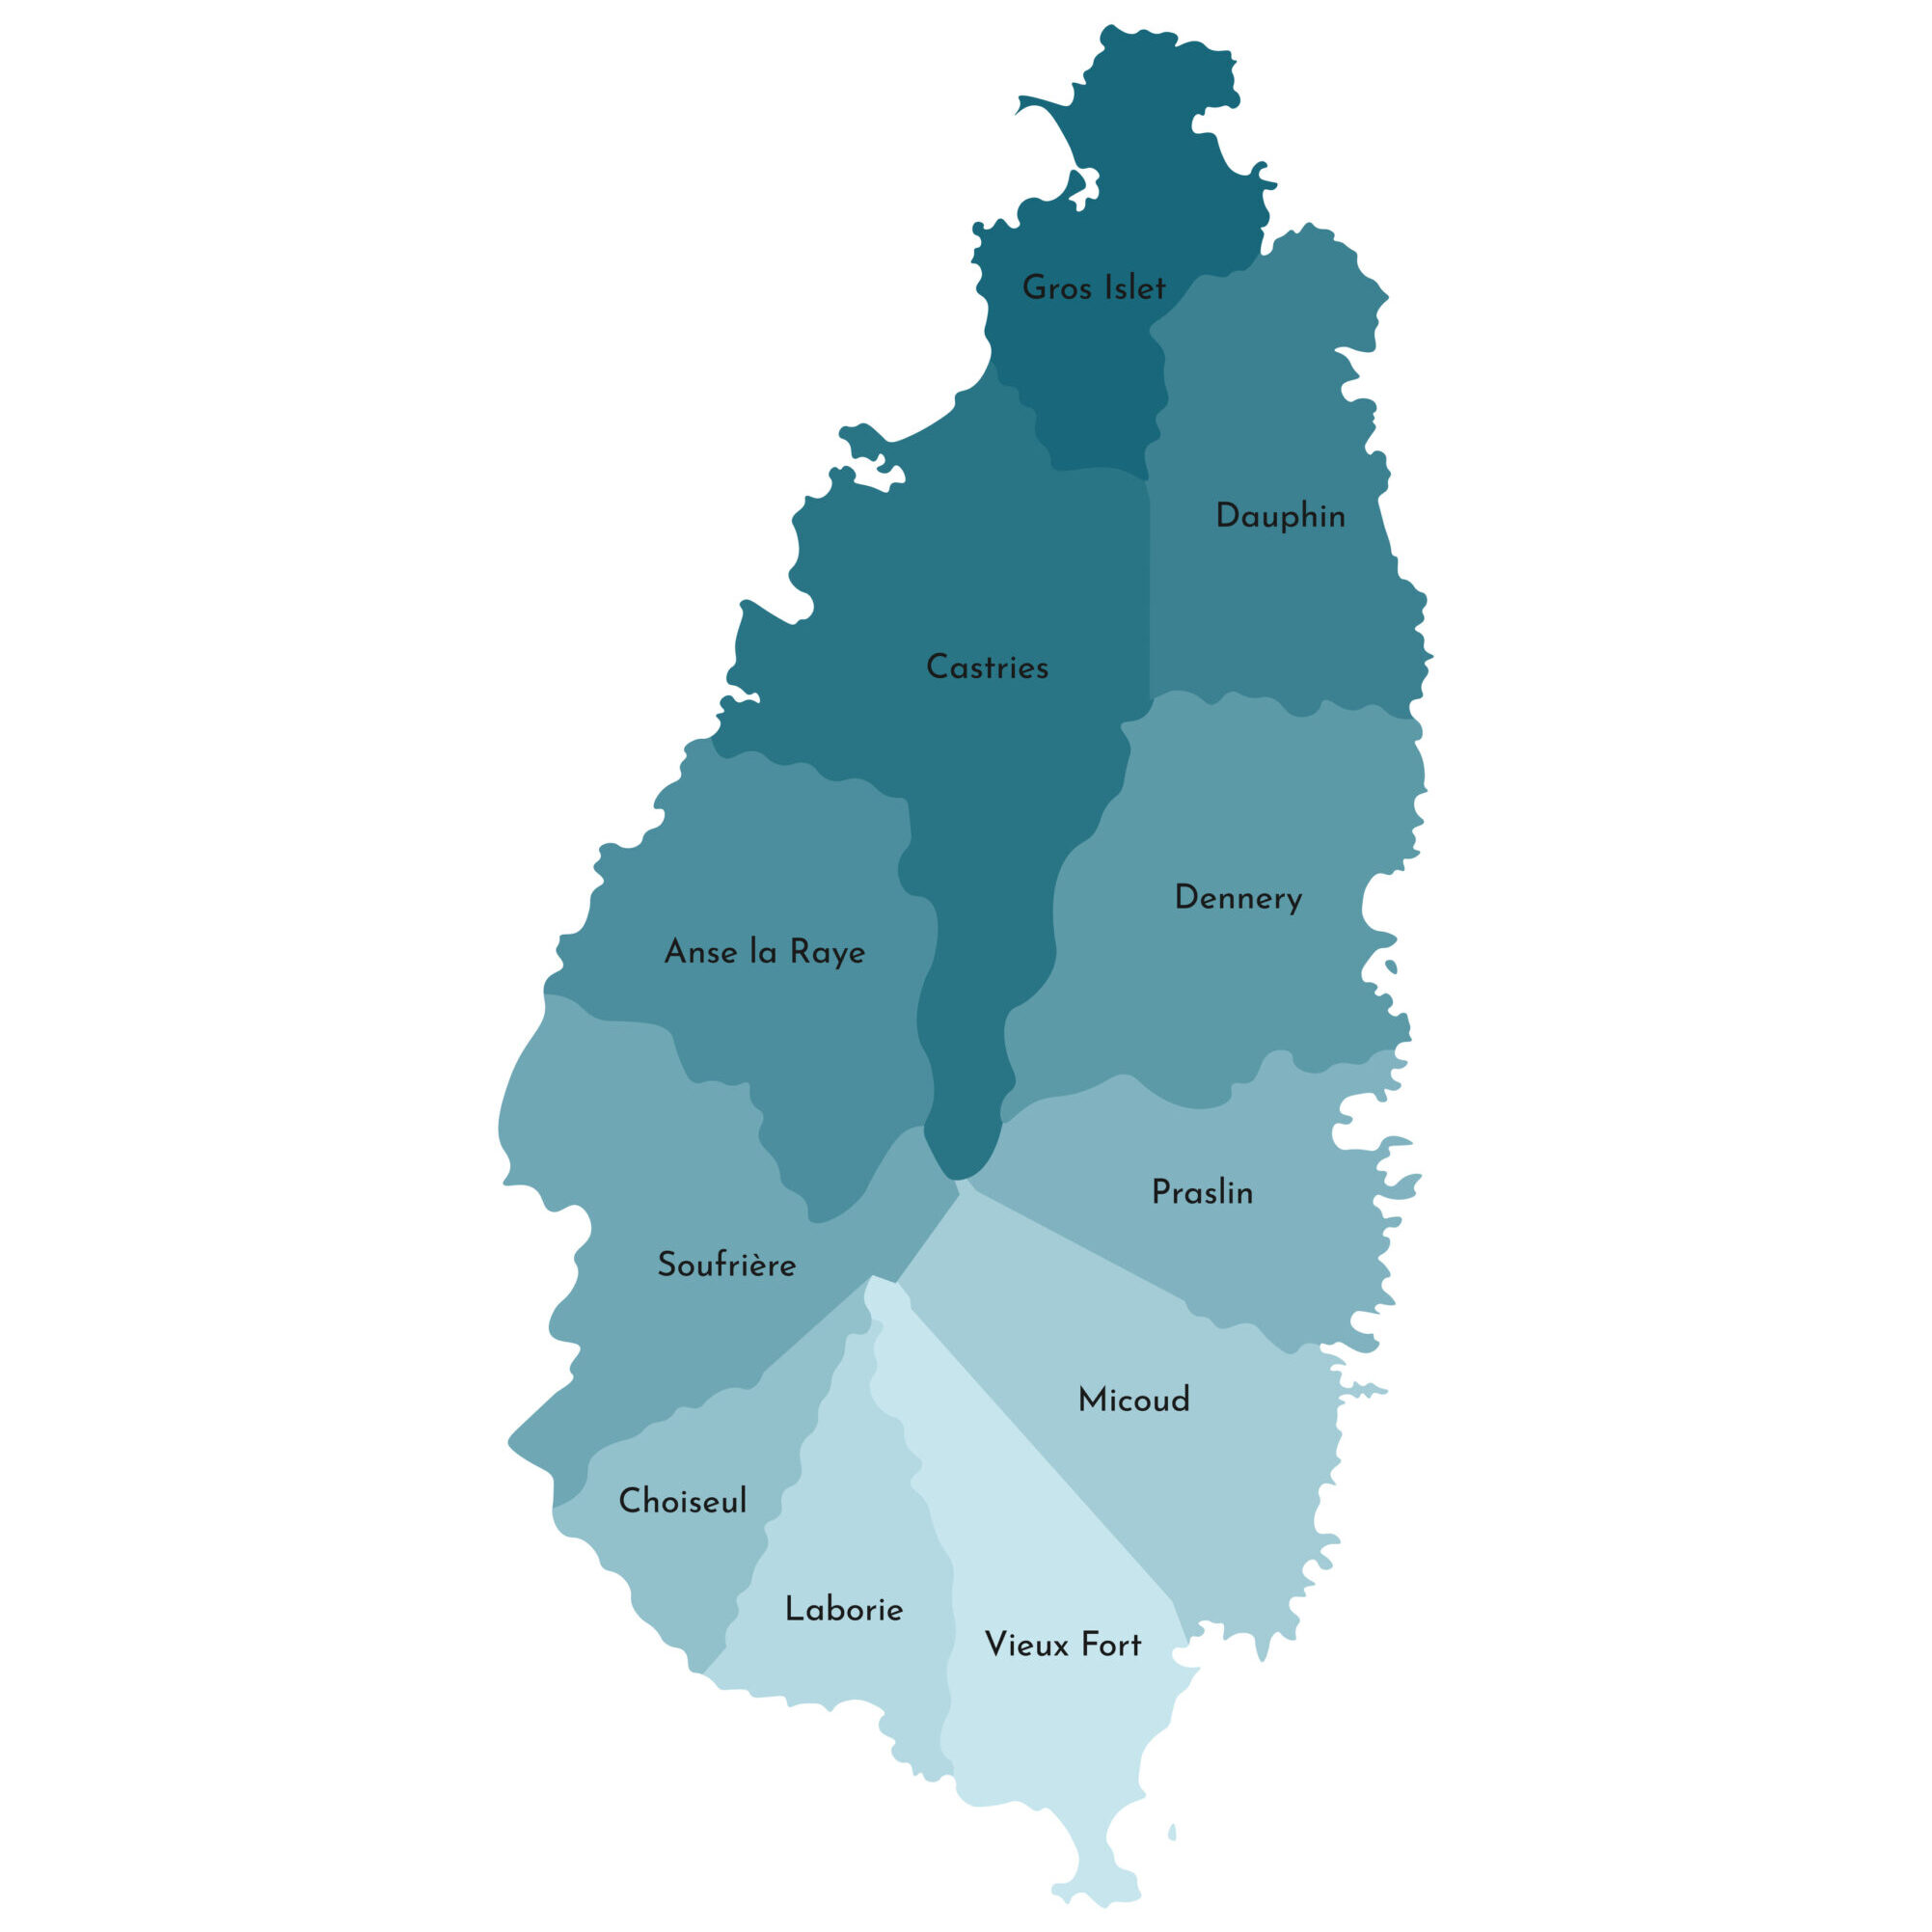 Vector isolated illustration of simplified administrative map of Saint Lucia﻿. Borders and names of the quarters (regions). Colorful blue khaki silhouettes